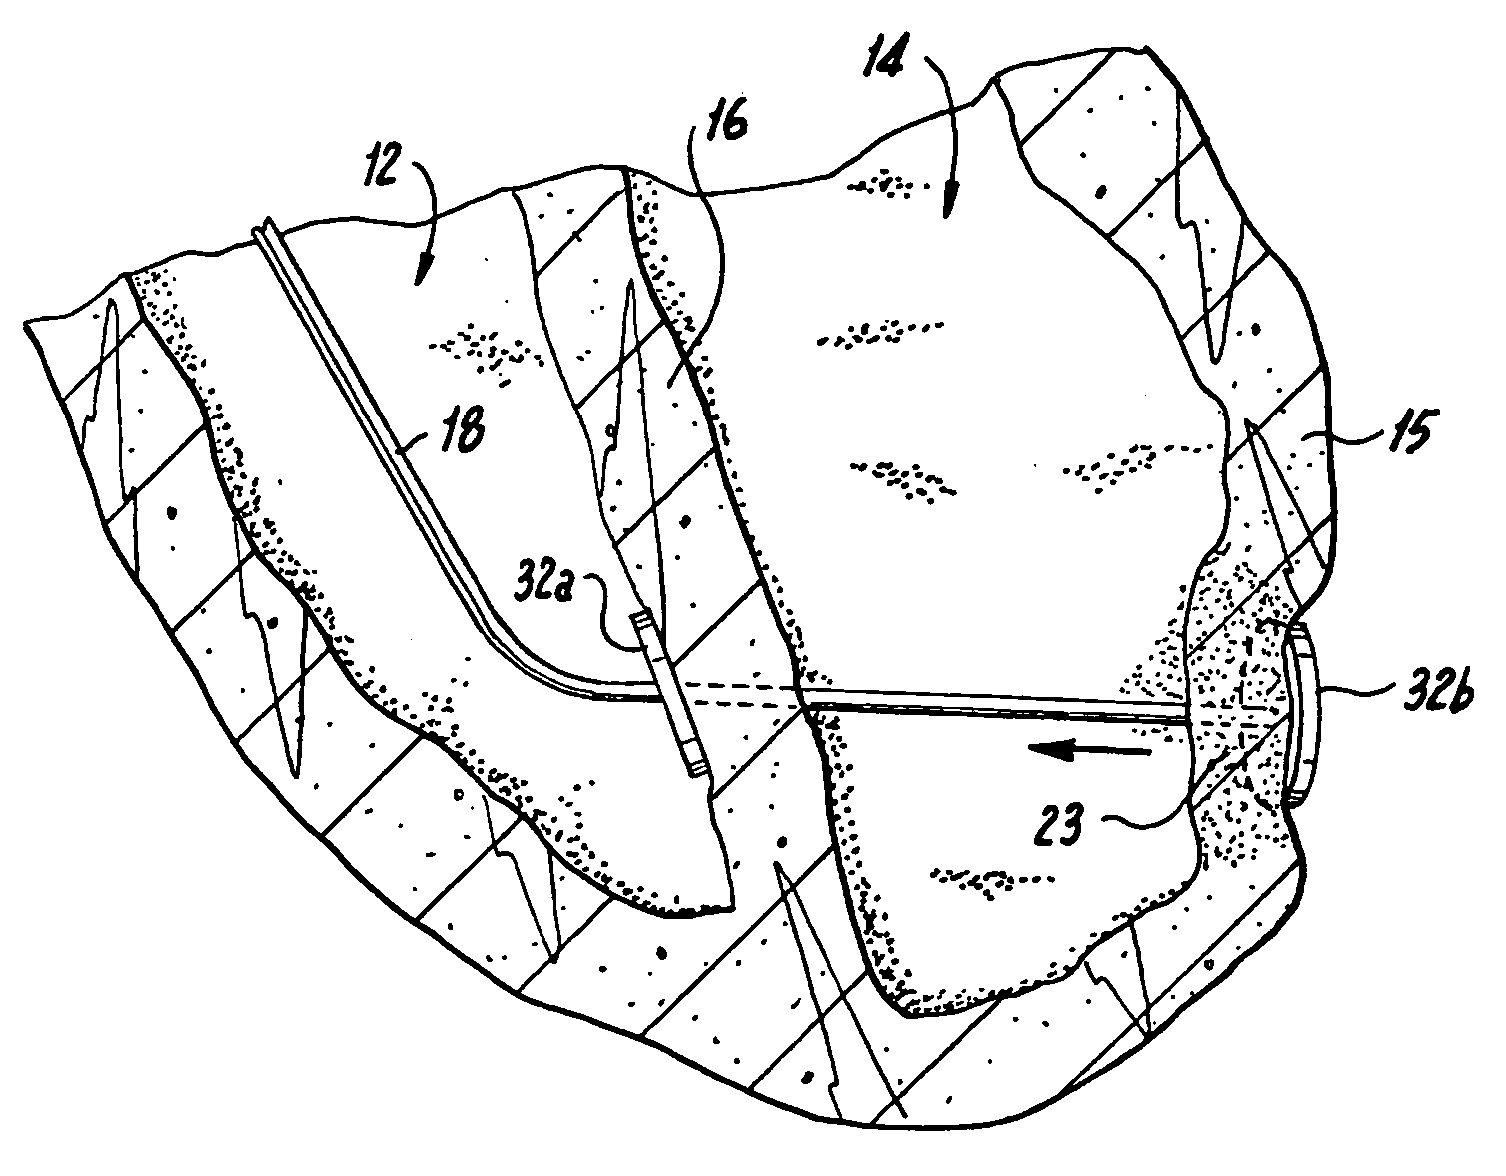 Method and device for percutaneous left ventricular reconstruction